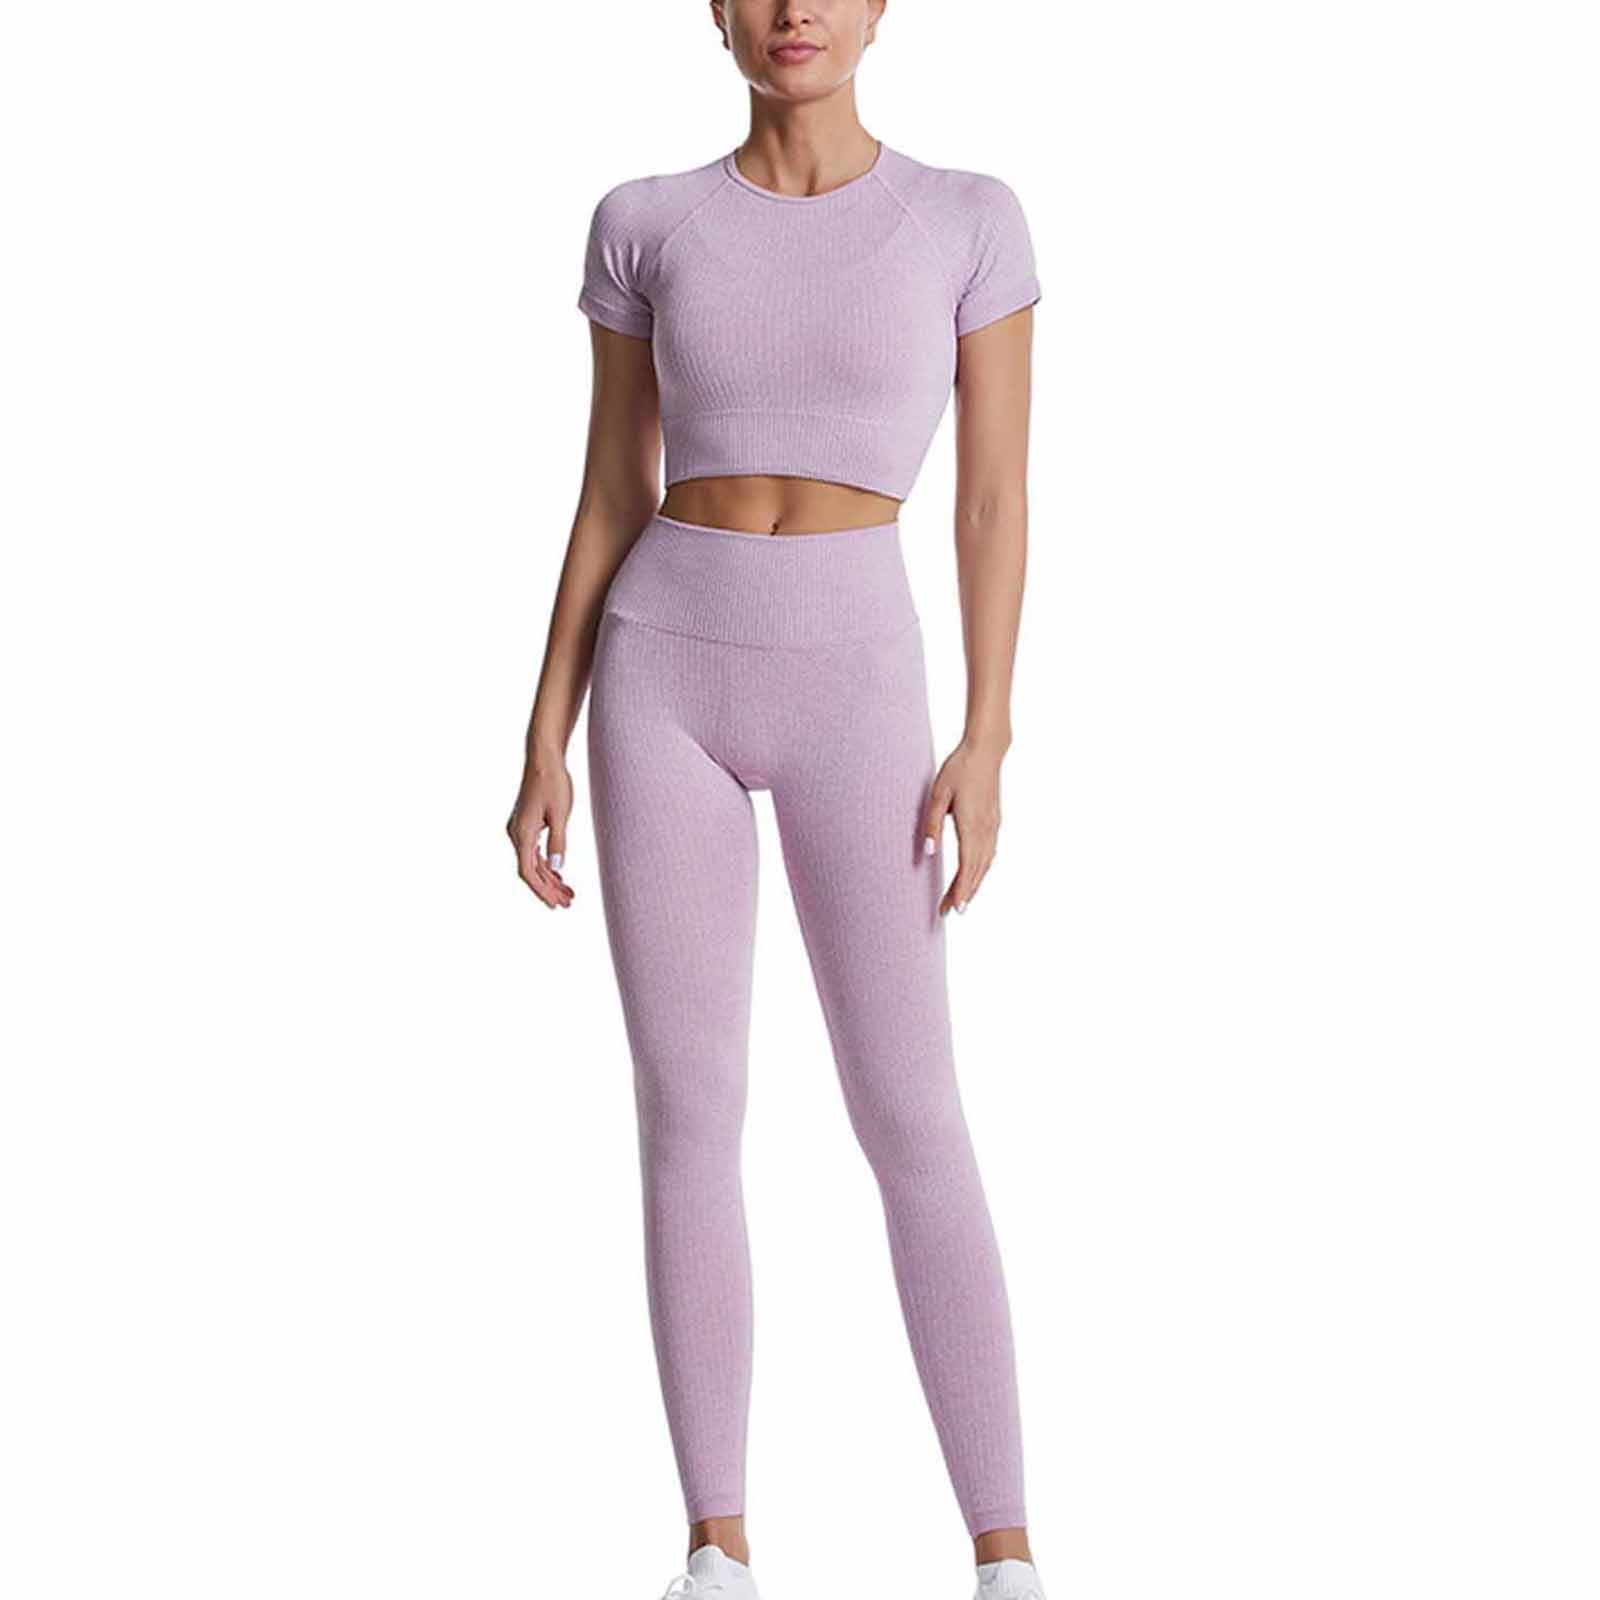 Yoga Outfits For Women 2 Piece Leggings Workout Sets, Short Sleeve